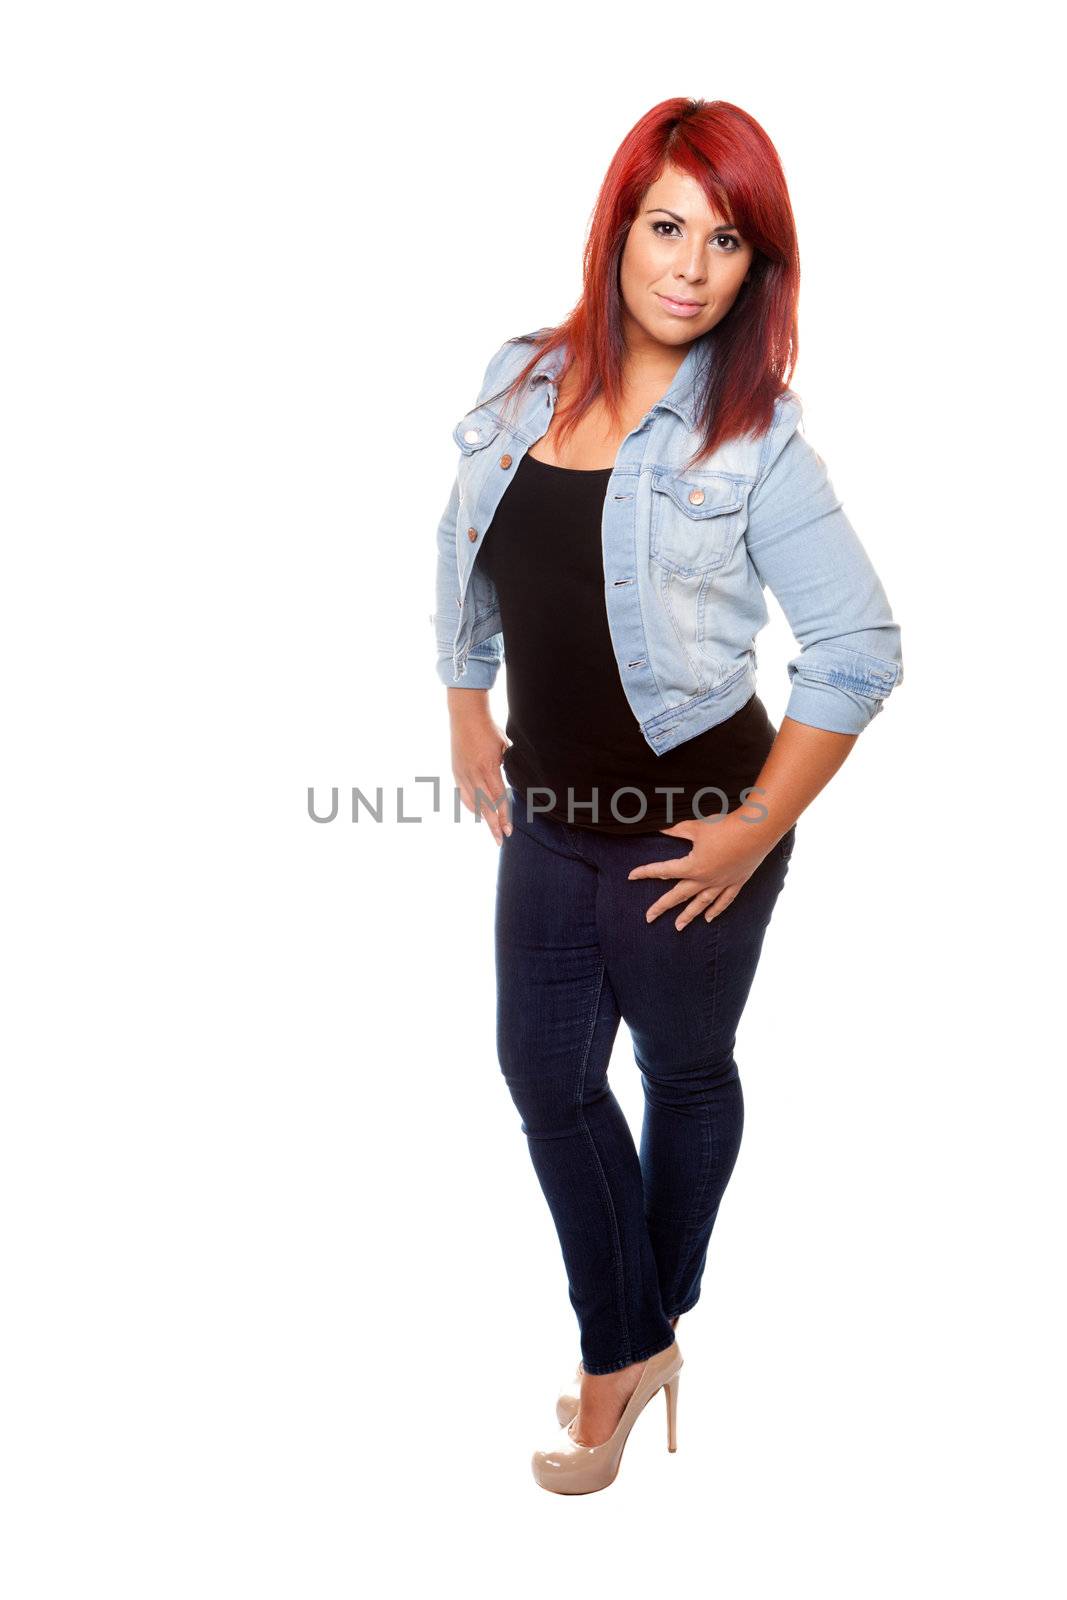 Young woman proudly shows off her physique wearing jeans over a white background.